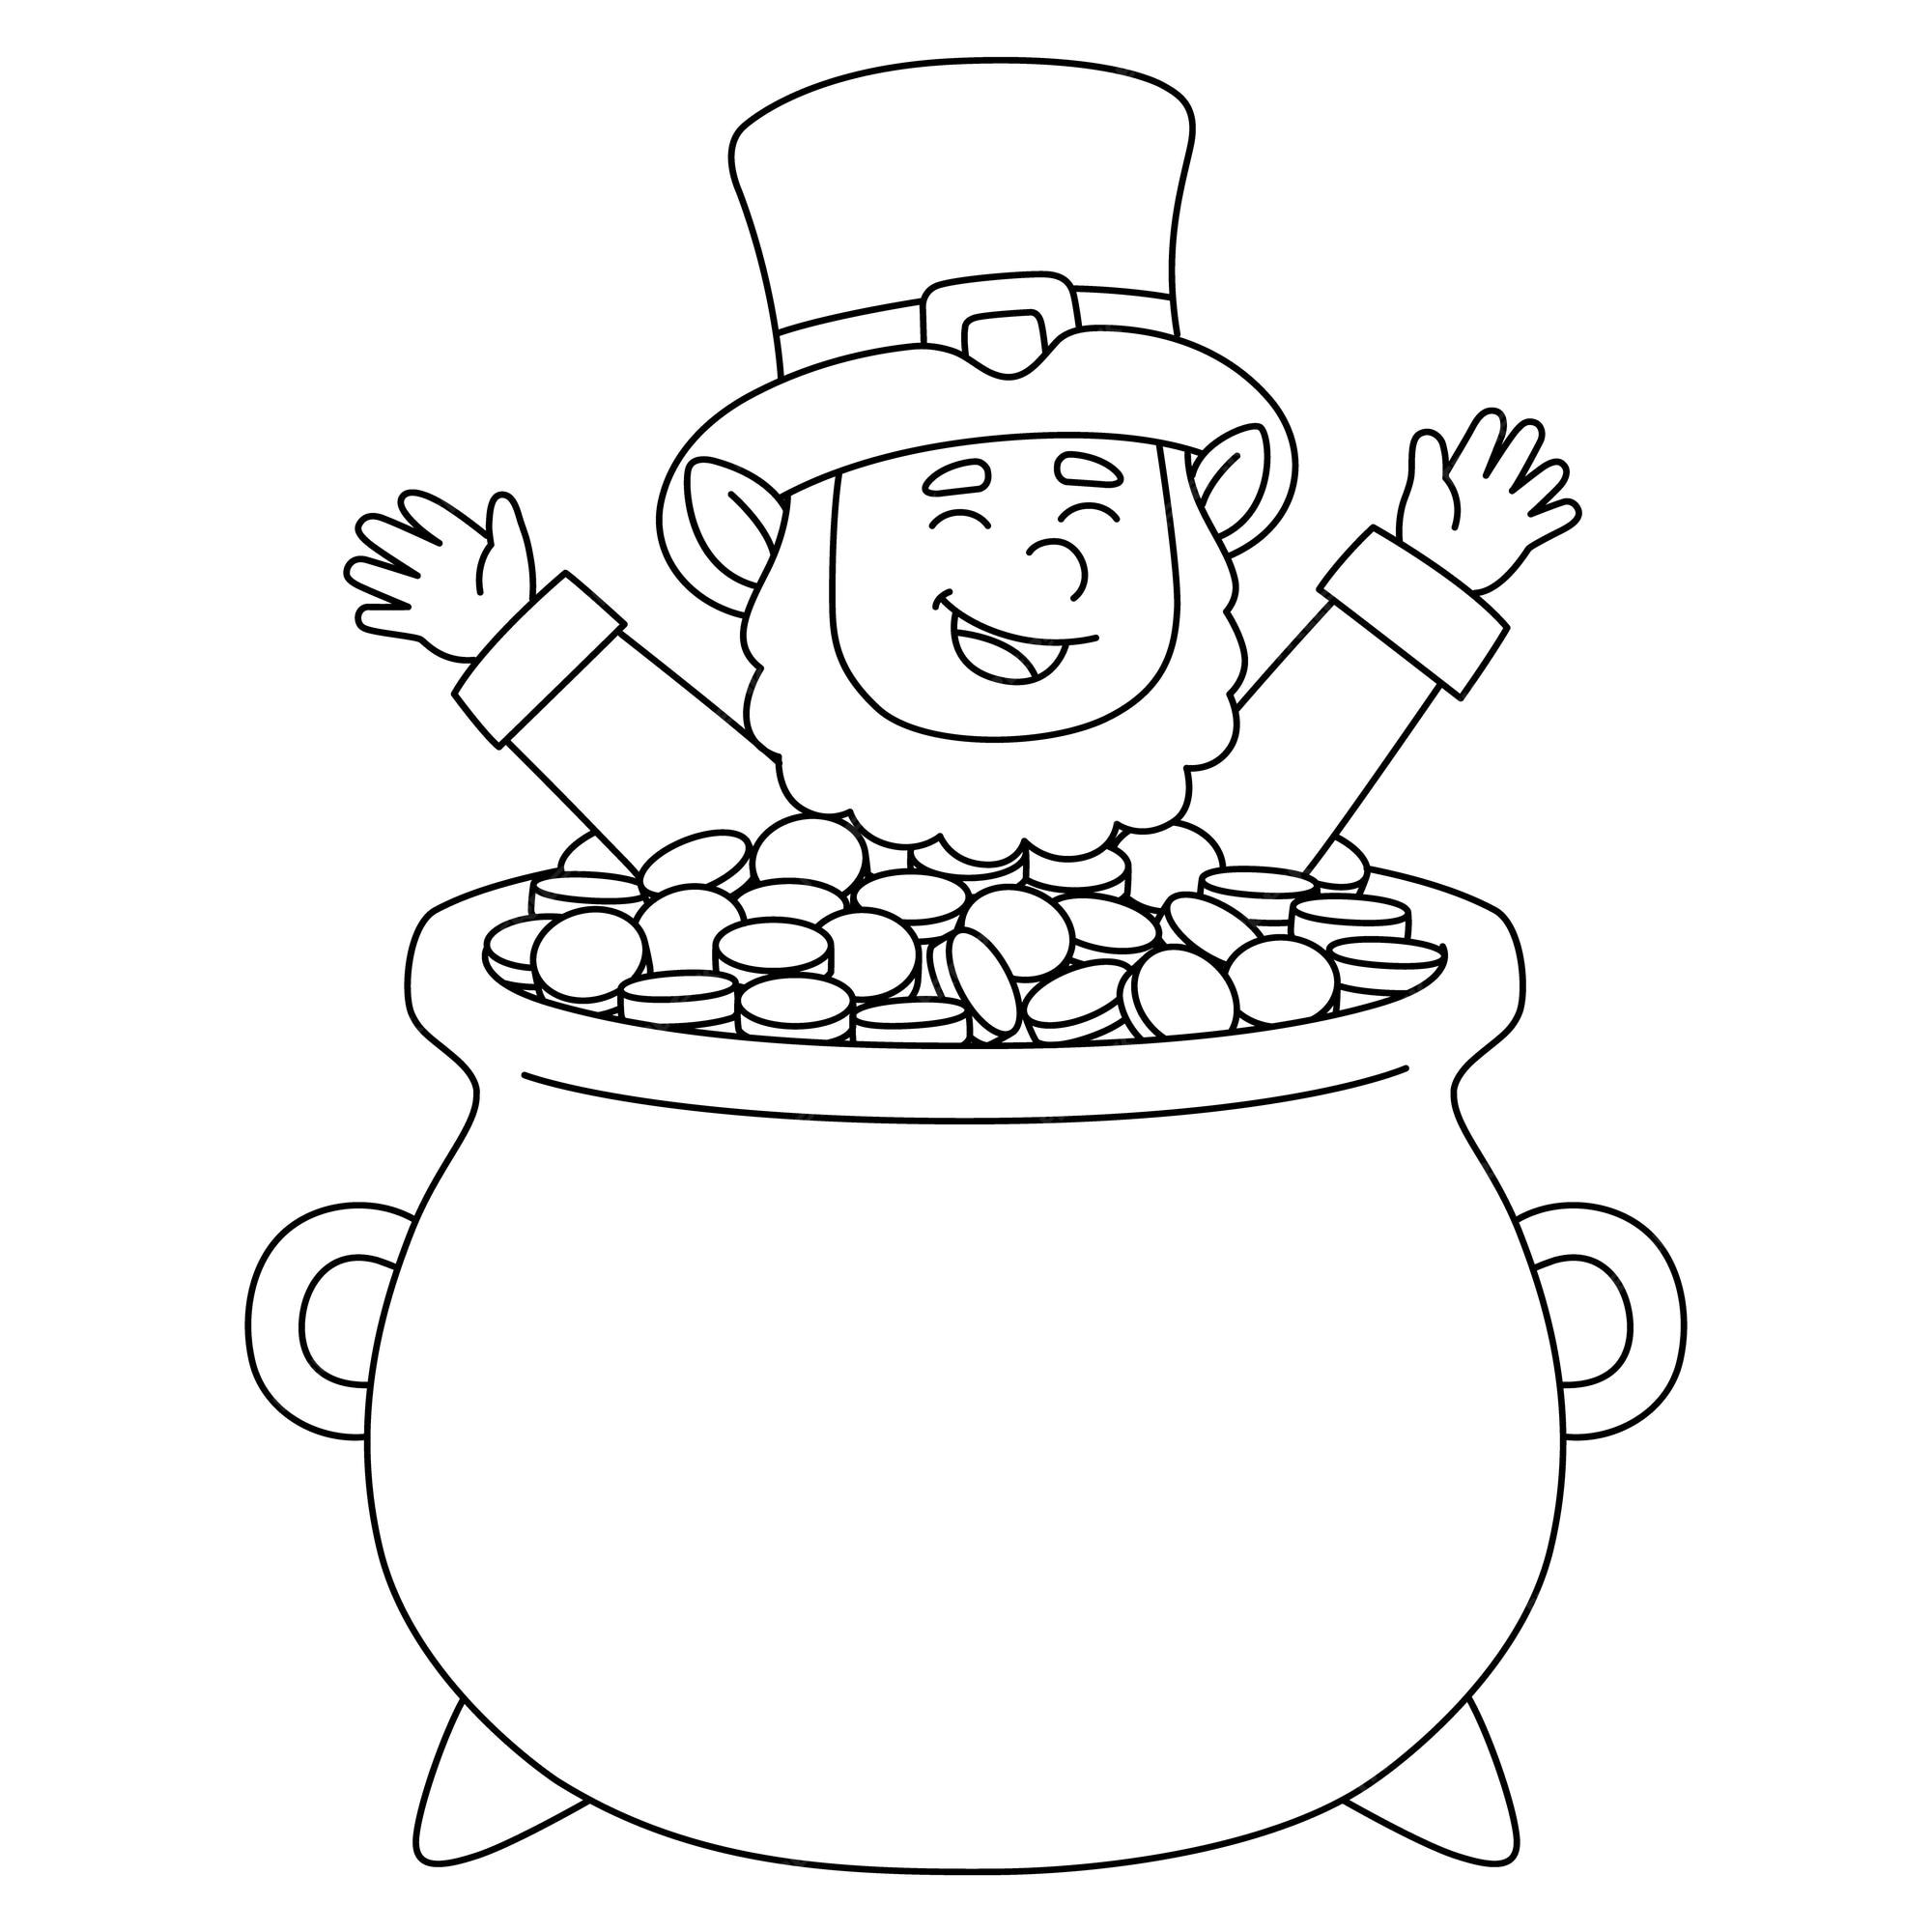 Premium vector a cute and funny coloring page of a st patrick day leprechaun pot of gold provides hours of coloring fun for children to color this page is very easy